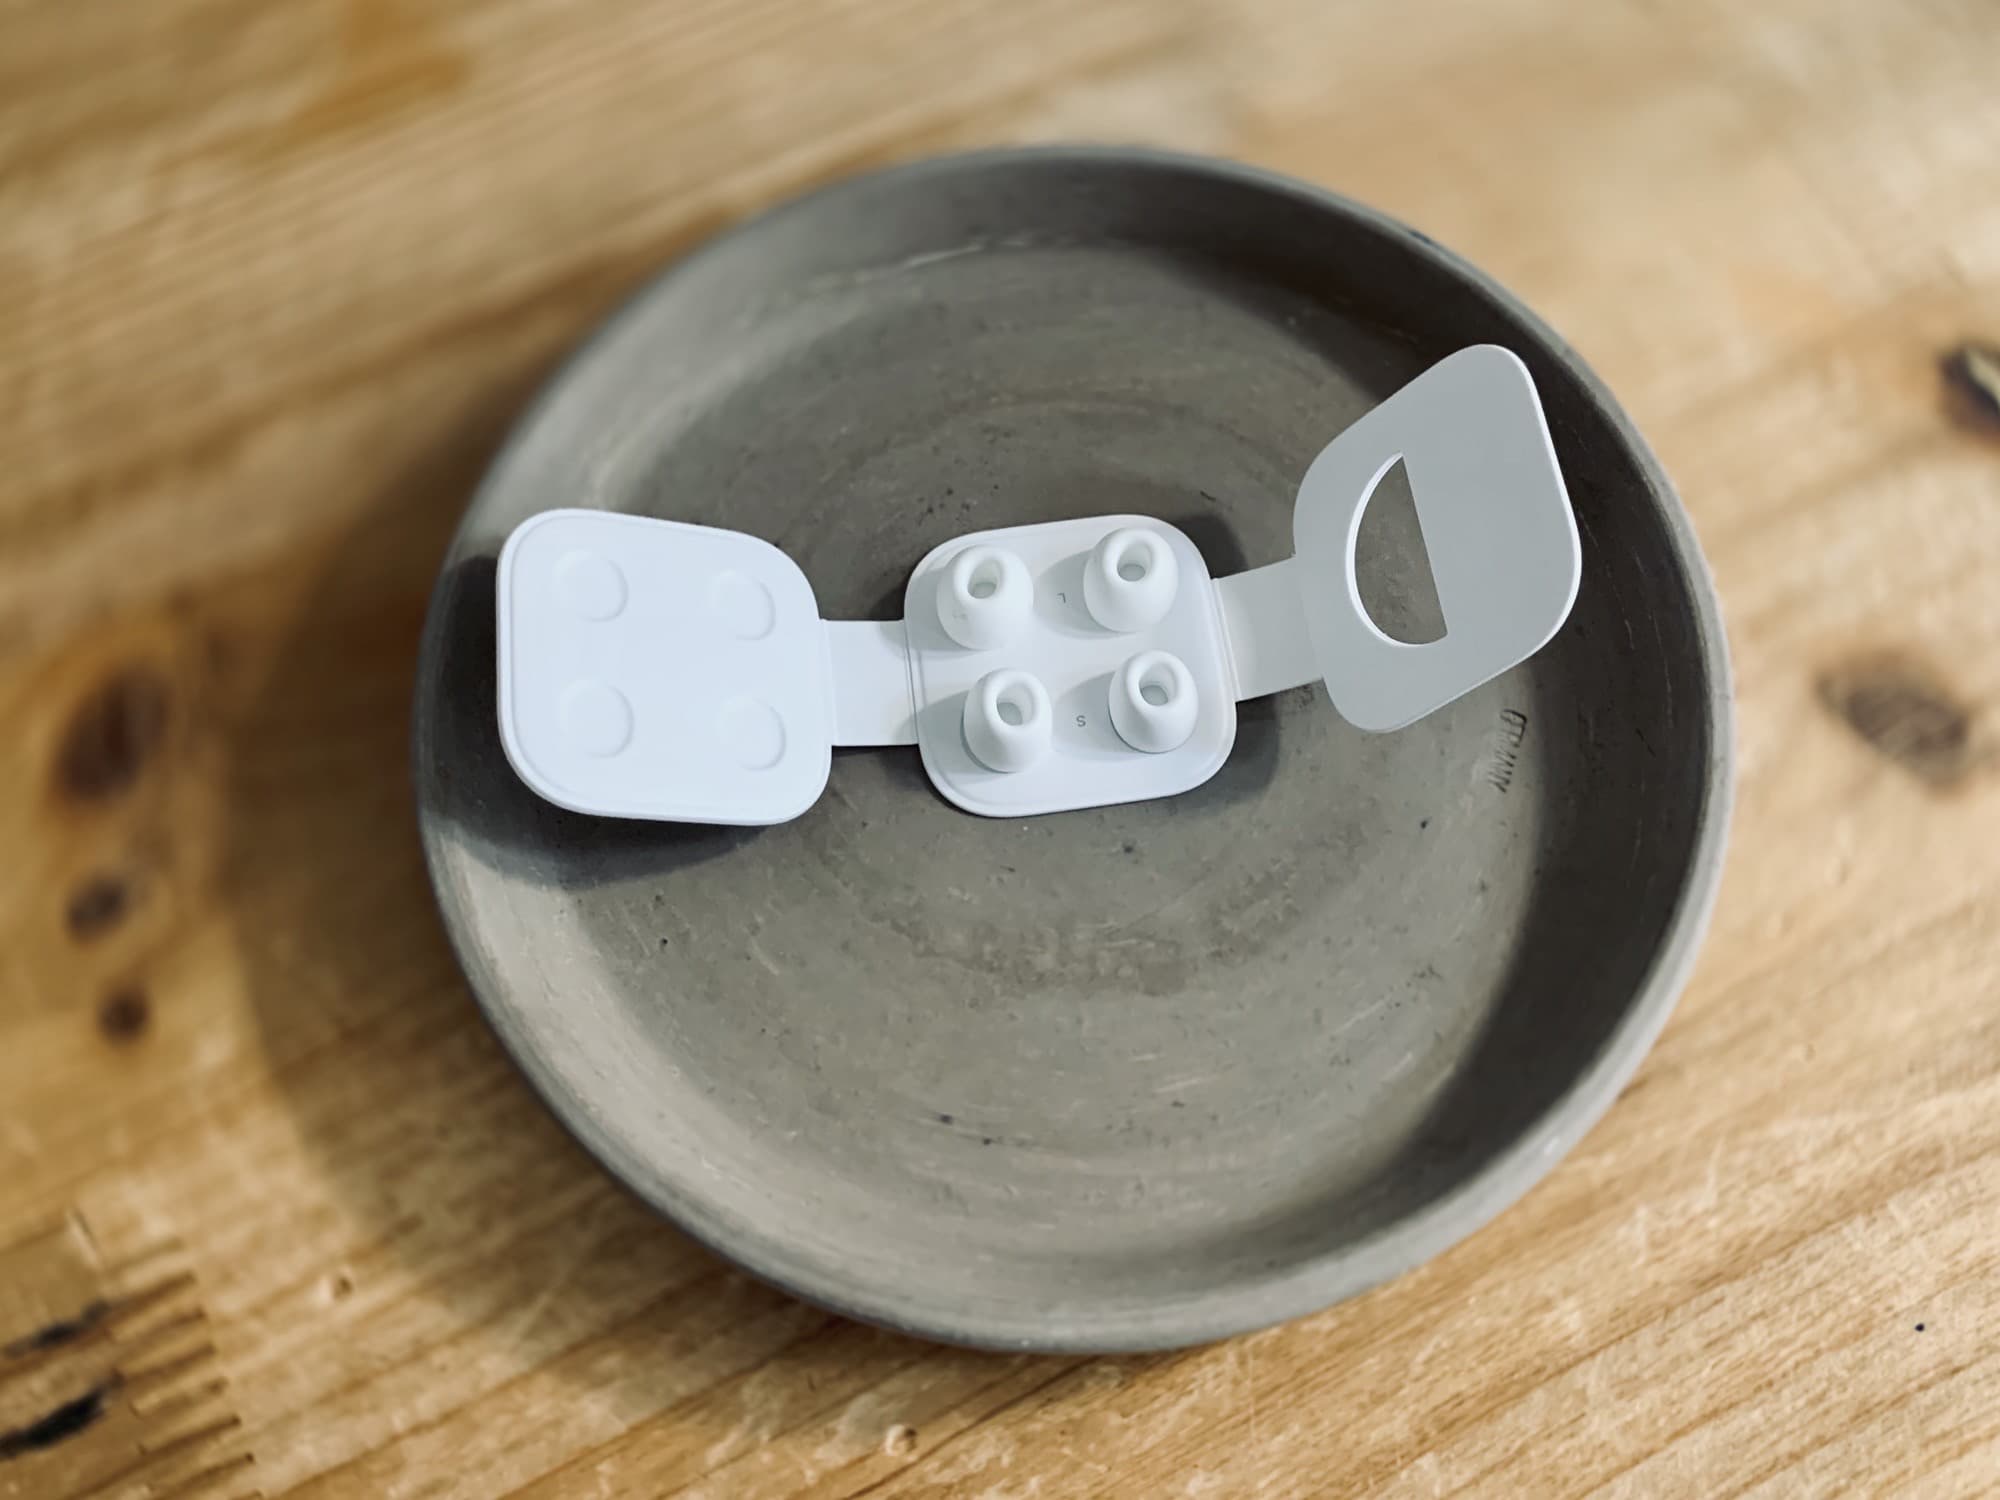 Just a few cents-worth of silicone can ruin your new $250 earbuds.